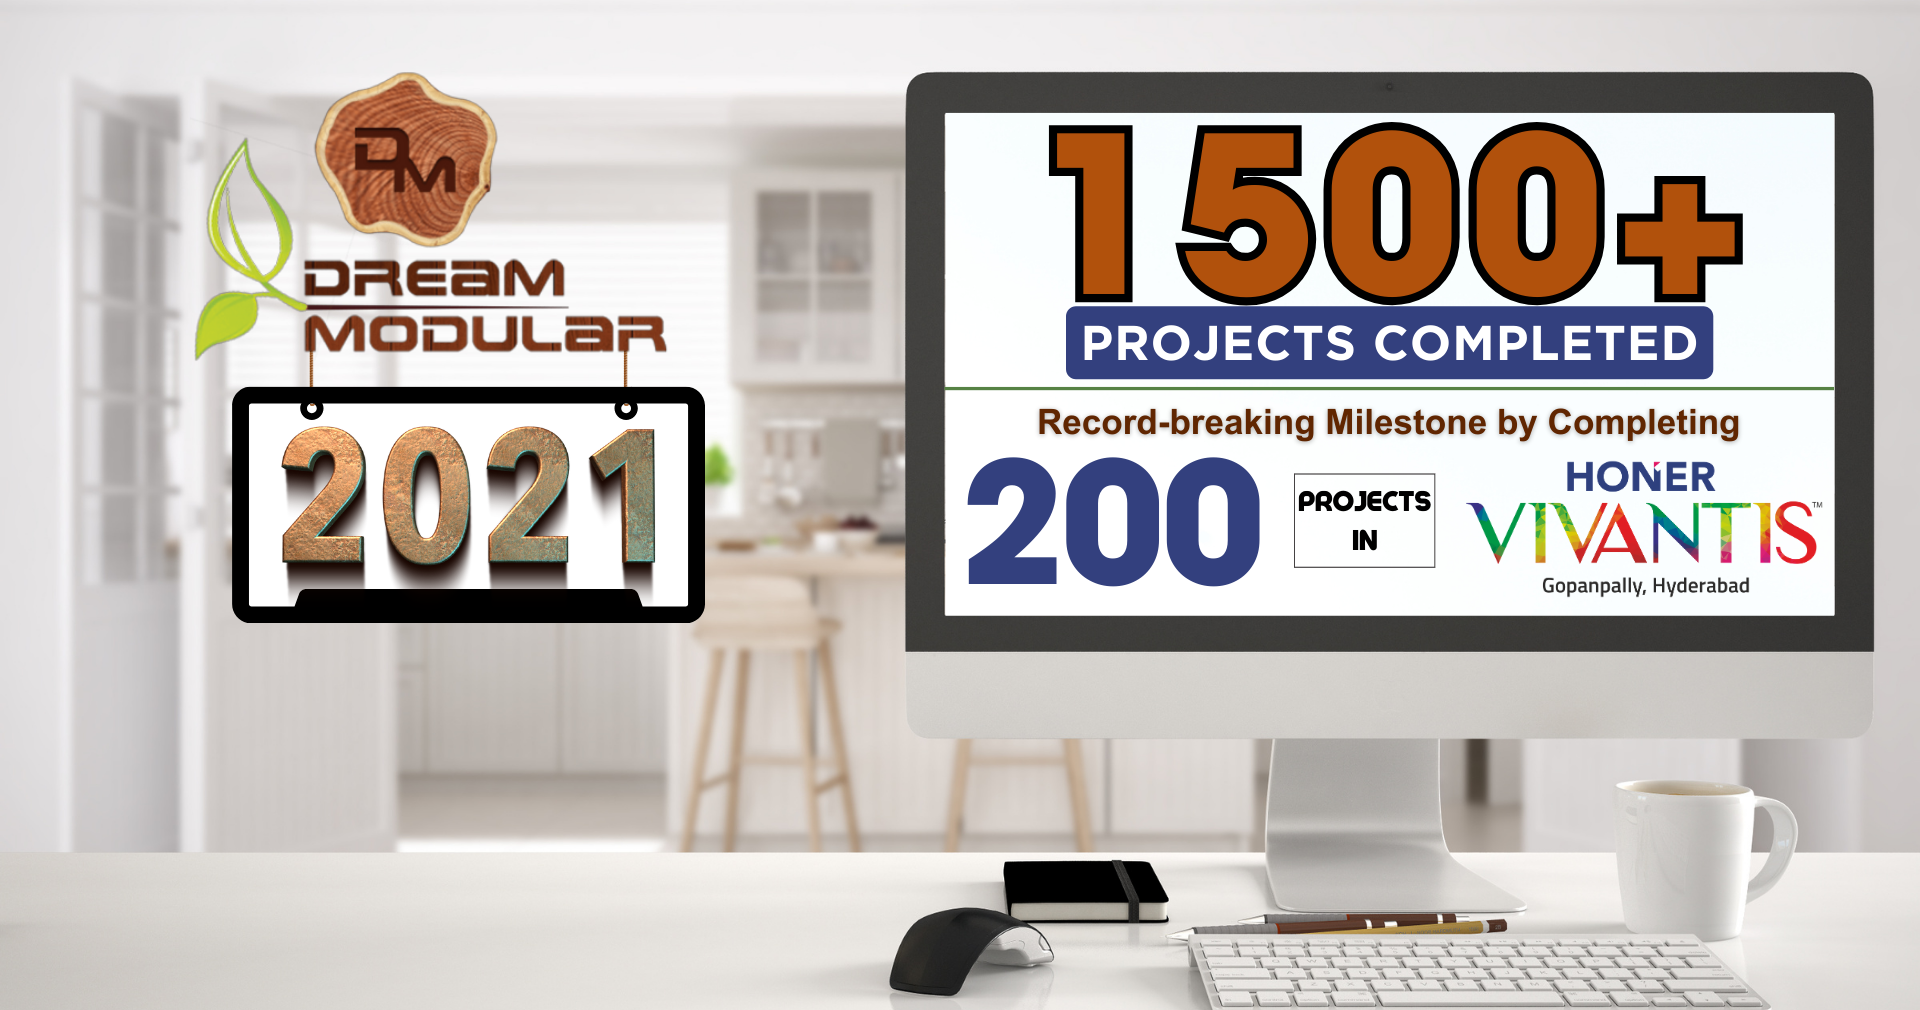 Achieved a record-breaking milestone by completing 200+ projects in Honer Vivantis, Hyderabad, and crossed the milestone of completing 1500+ projects. - 2021